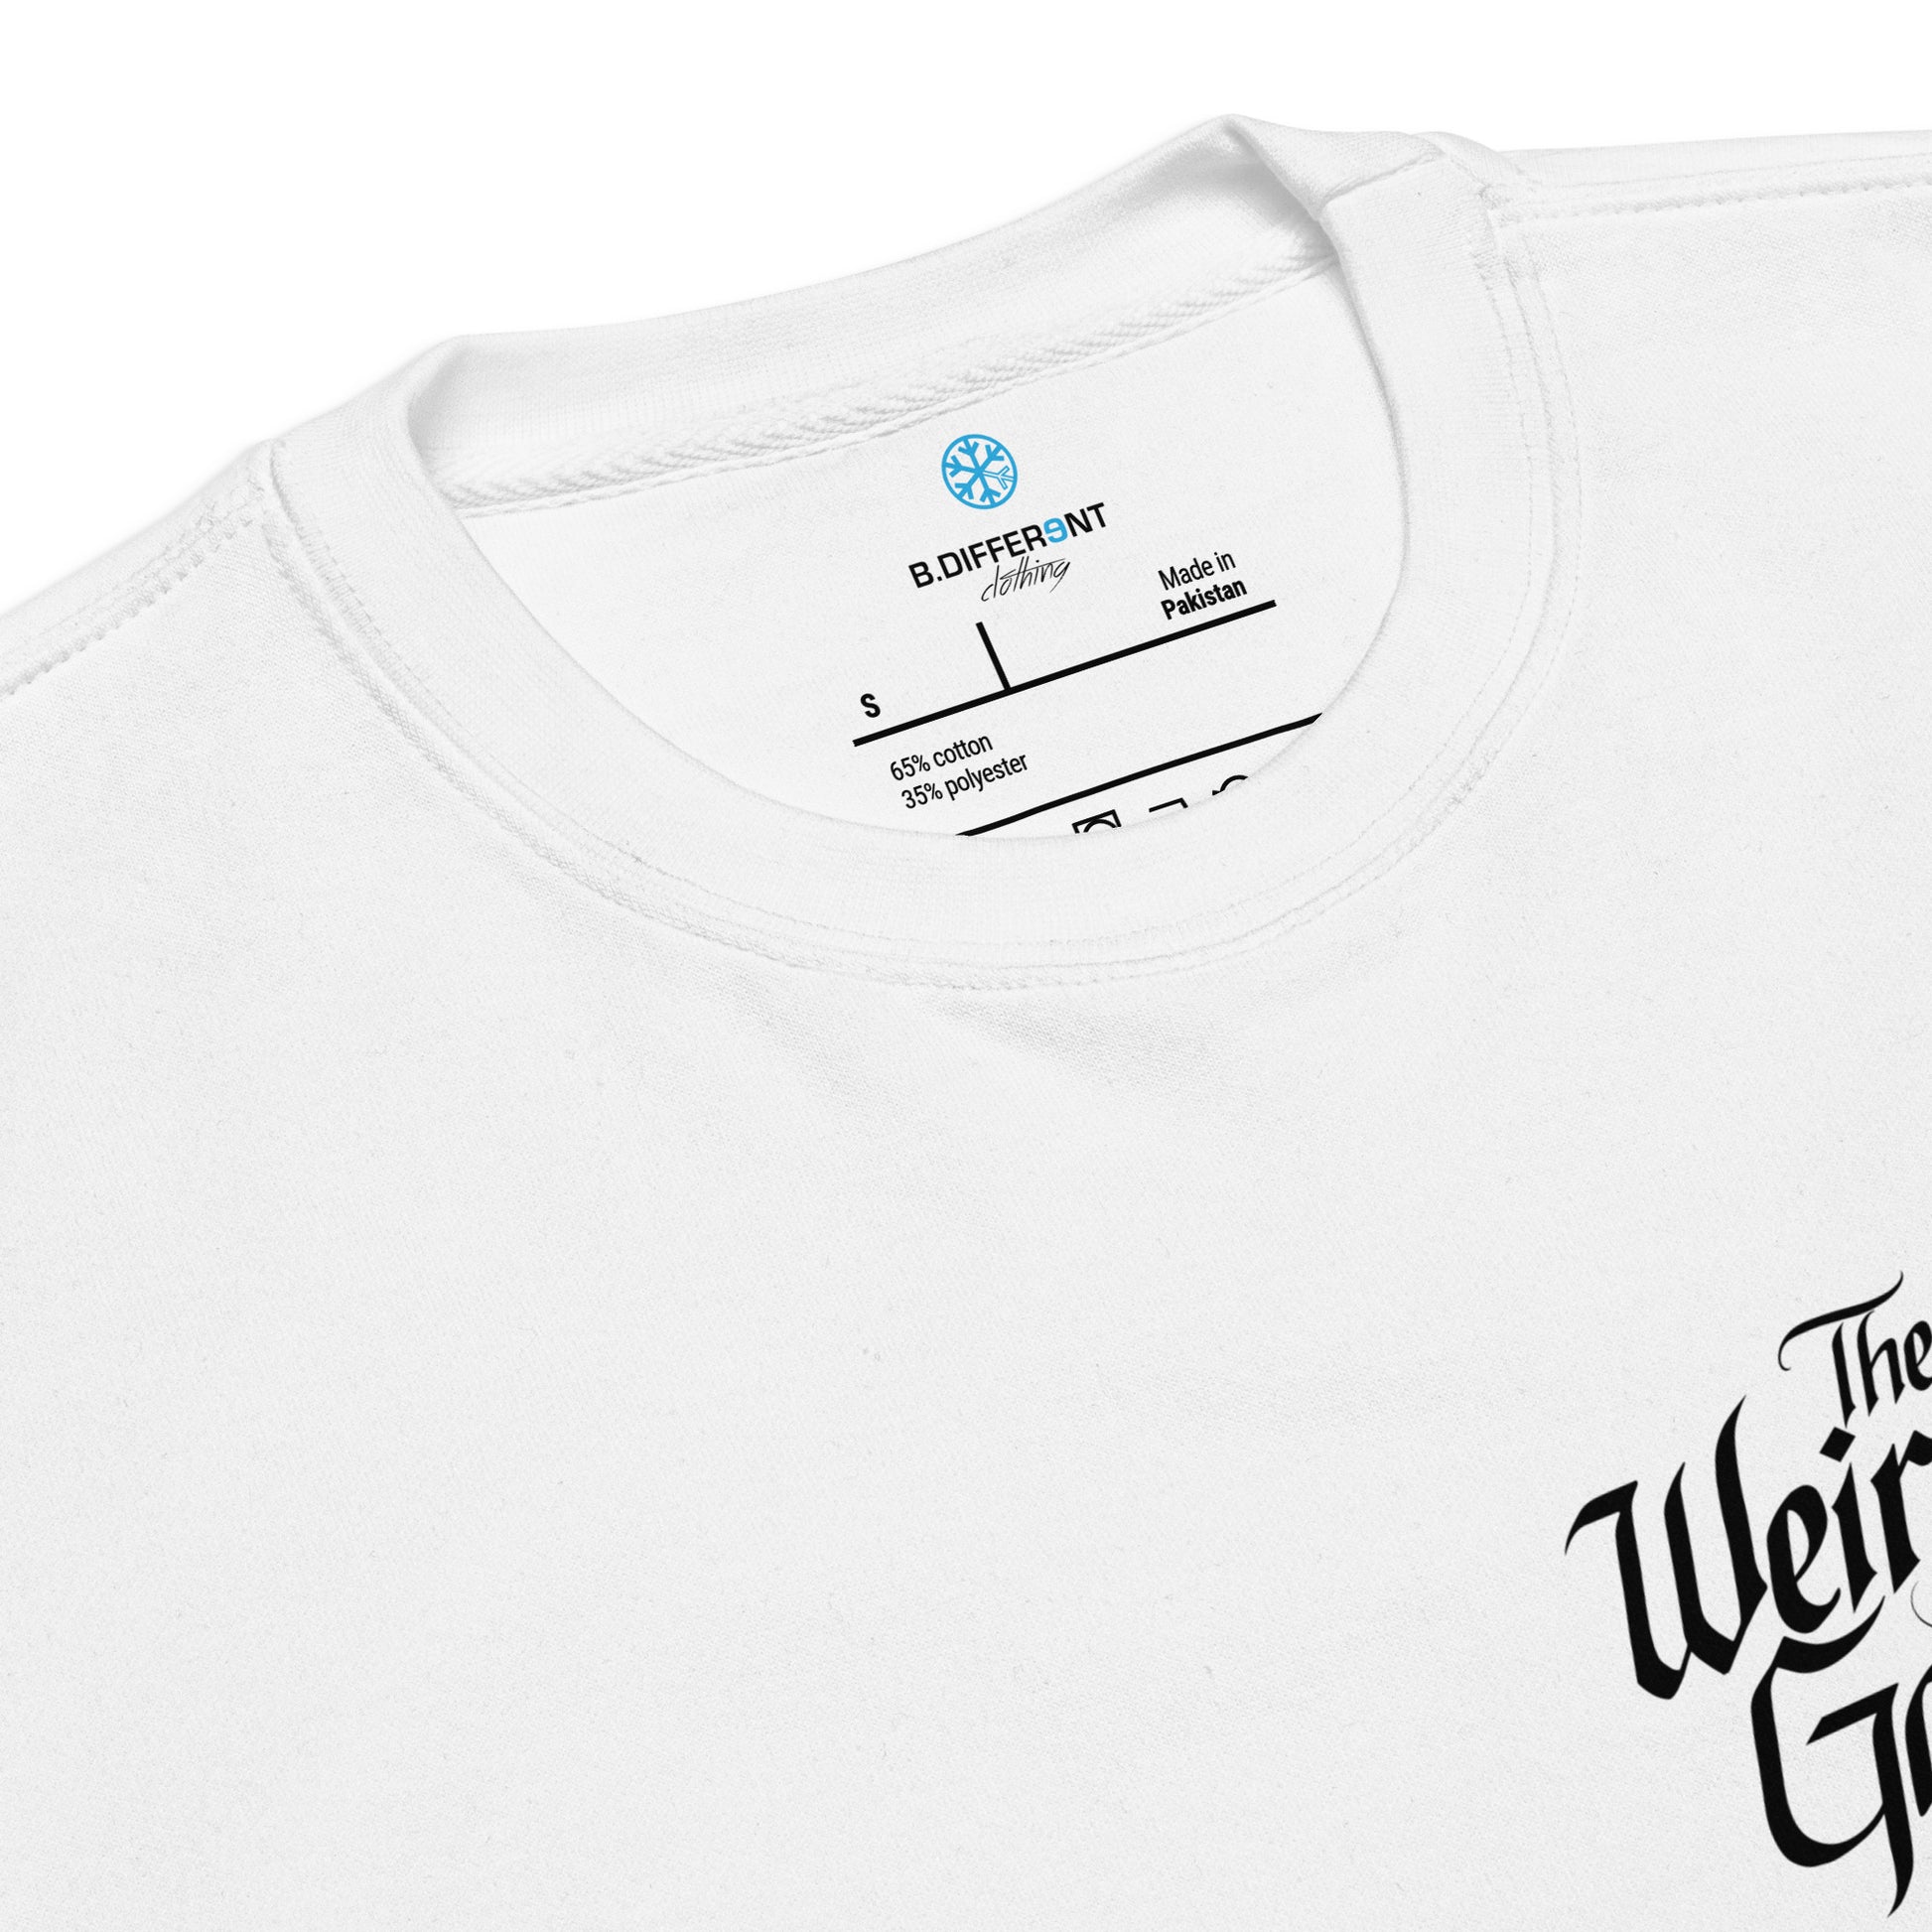 collar of Weirdos Gang lettering sweatshirt white by B.Different Clothing street art graffiti inspired brand for weirdos, outsiders, and misfits.